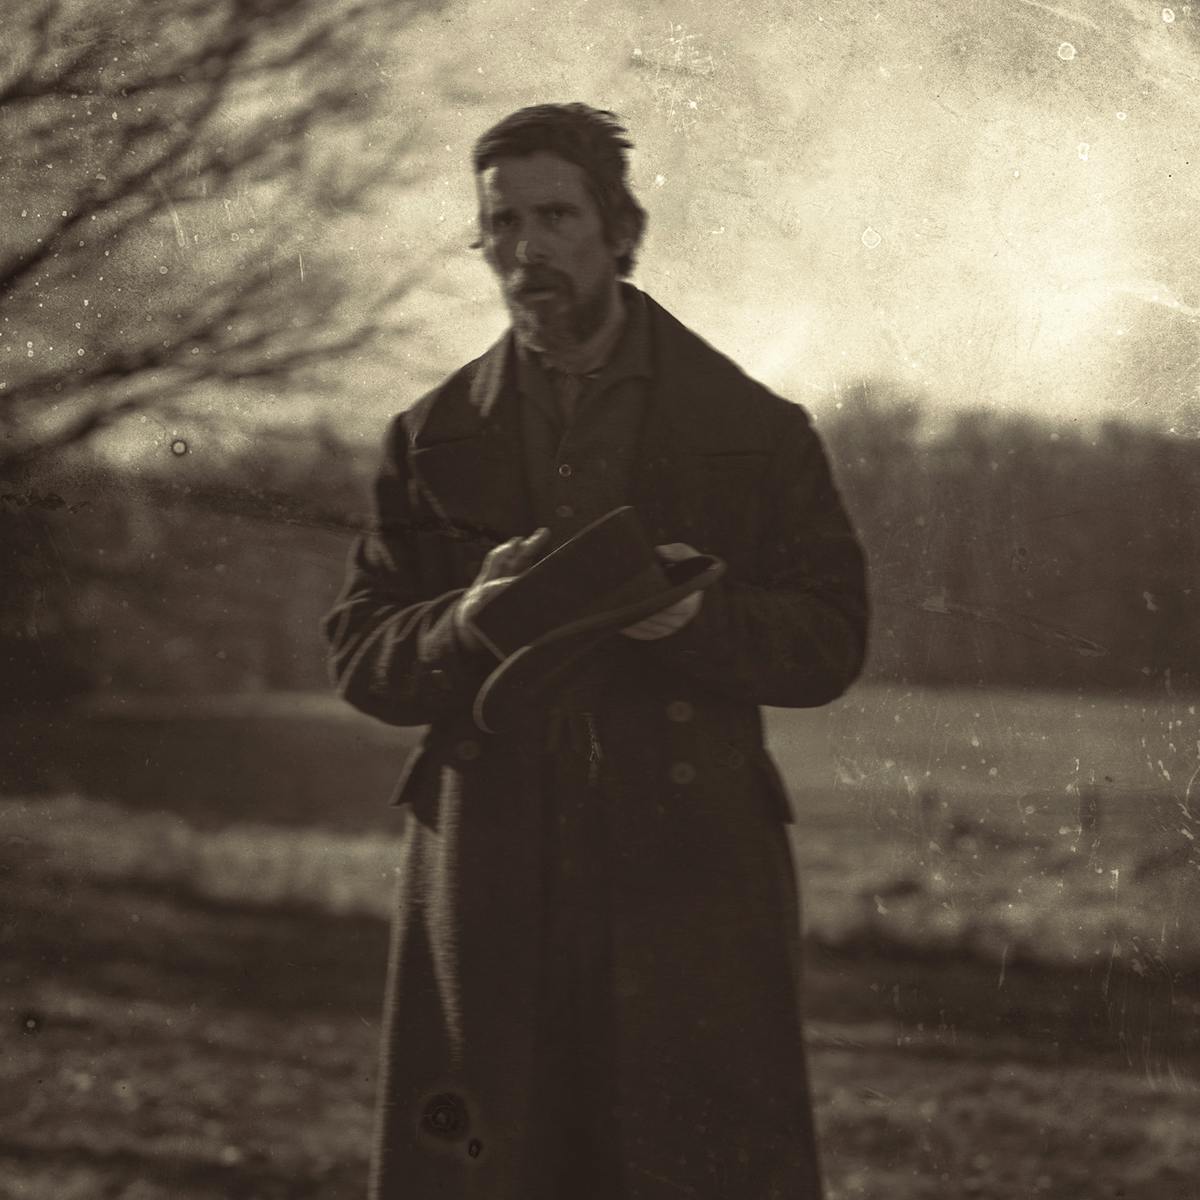 Augustus Landor (Christian Bale) wears a long coat in this sepia-toned picture.